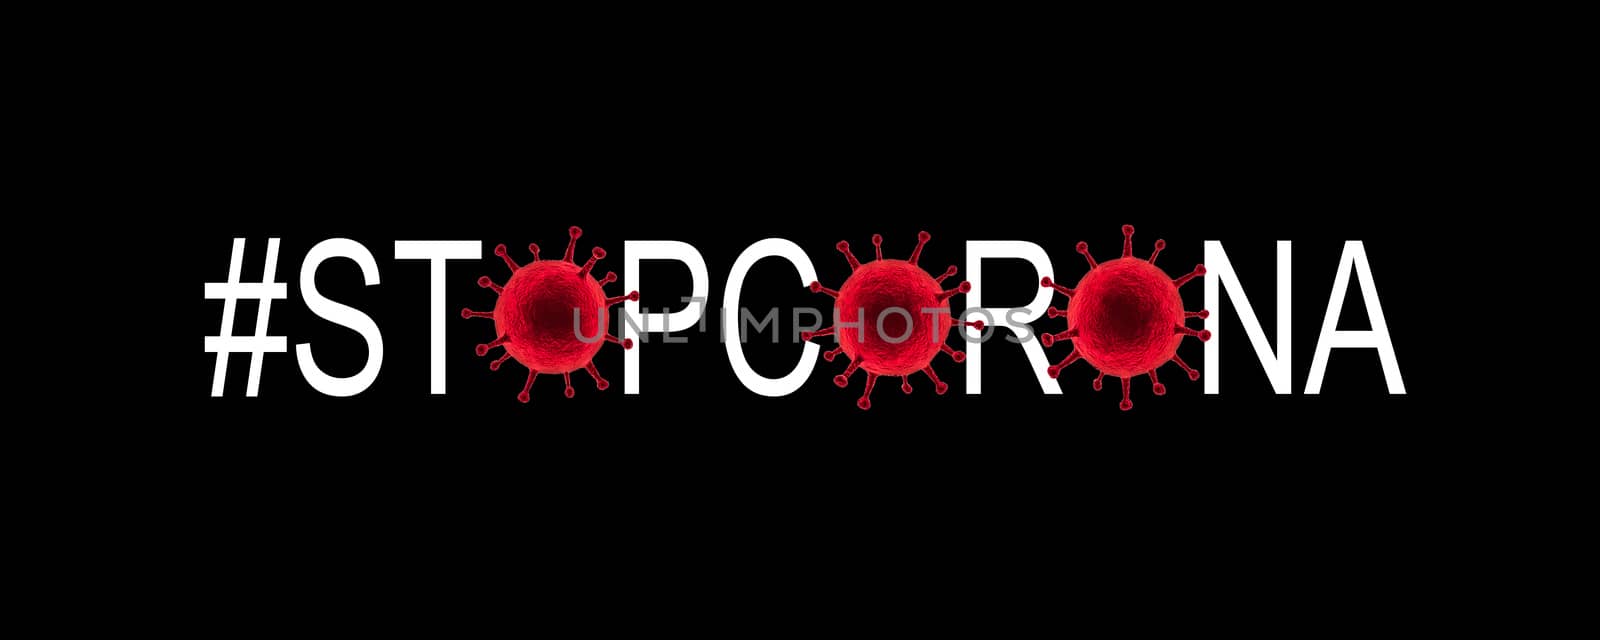 Chalkboard banner of corona virus tags in different colors by MP_foto71